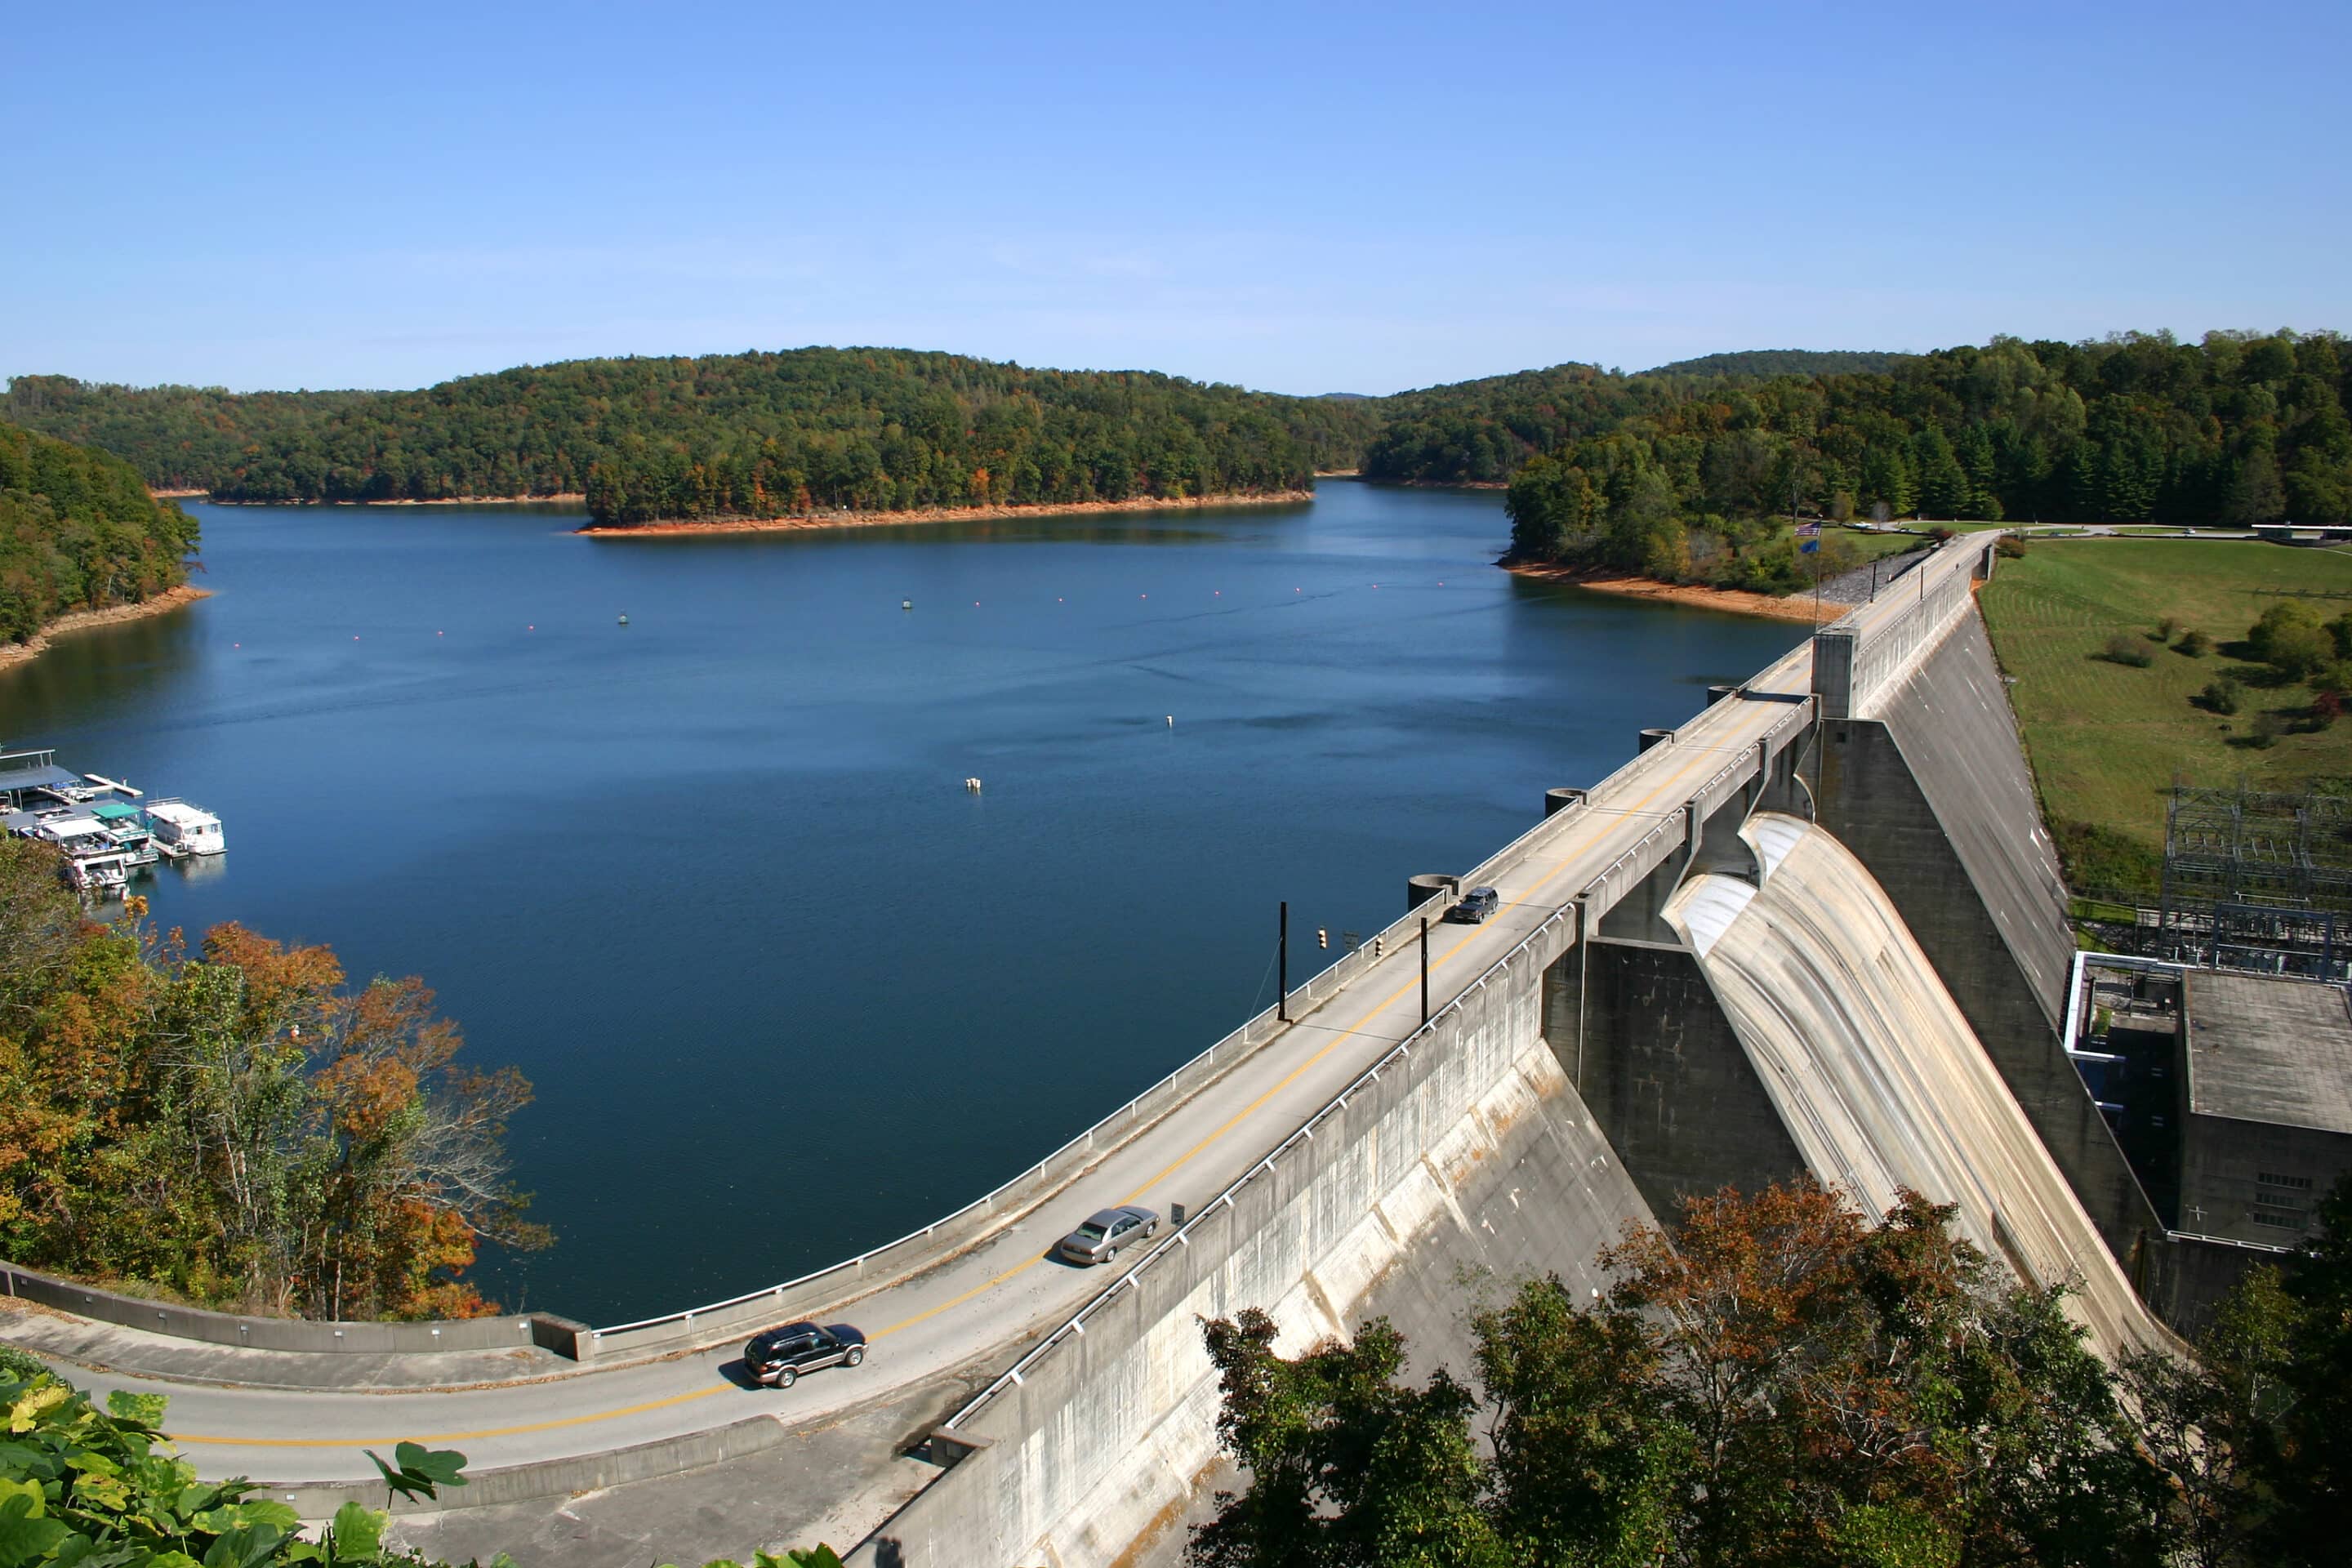 Norris Dam in Tennessee, a critical structure for flood control, illustrating the need for reliable Tennessee flood insurance for waterfront properties.